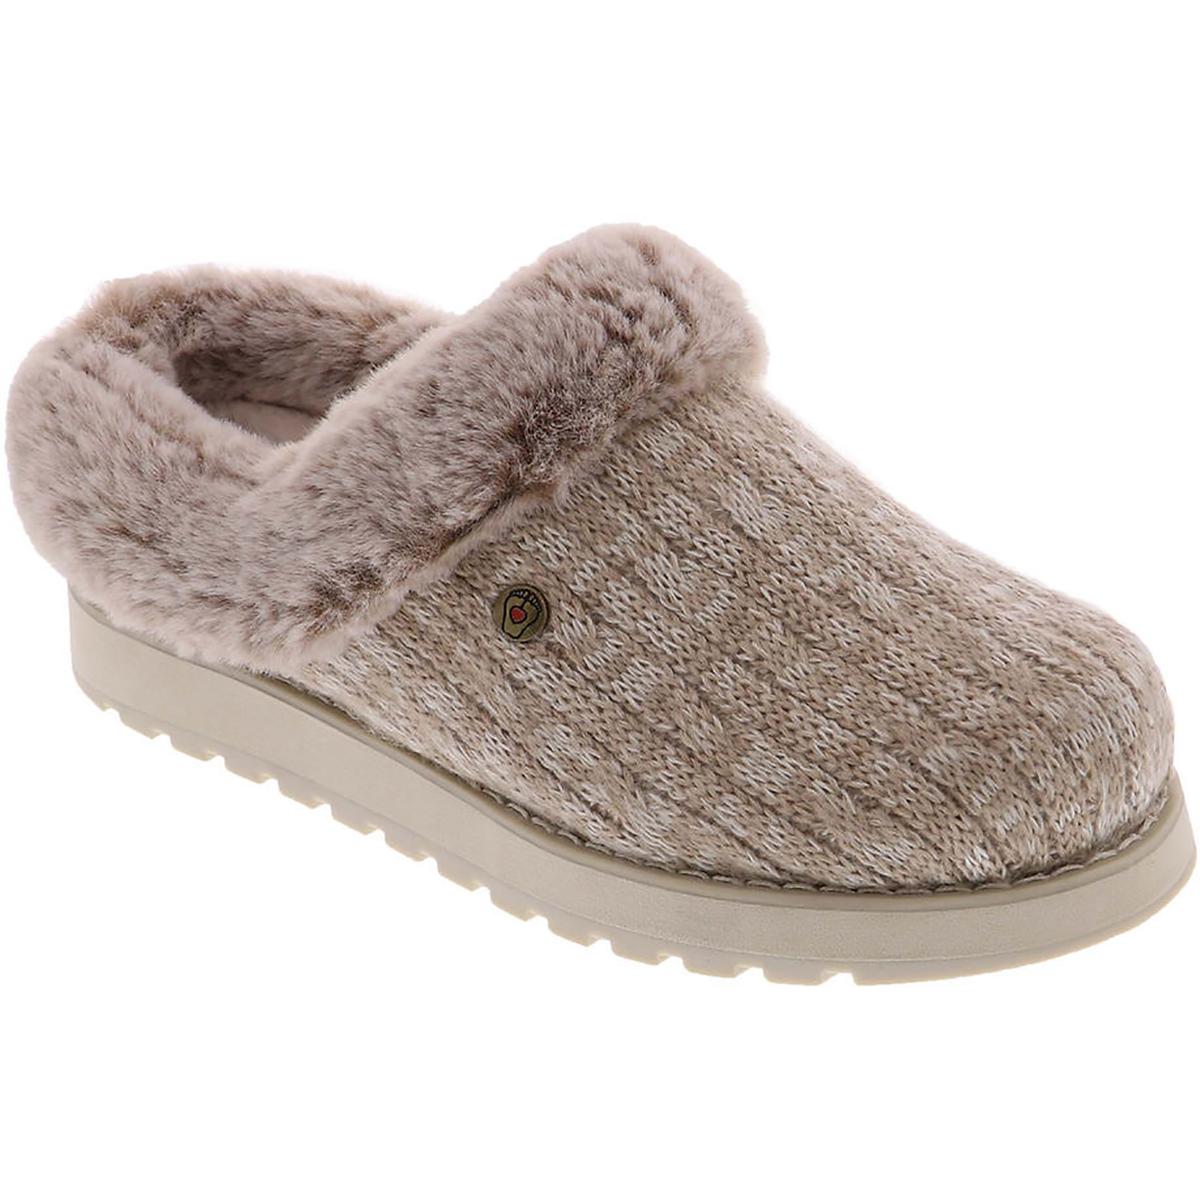 Skechers Keepsakes Ice Angel Womens Cable Knit Faux Fur Clog Slippers